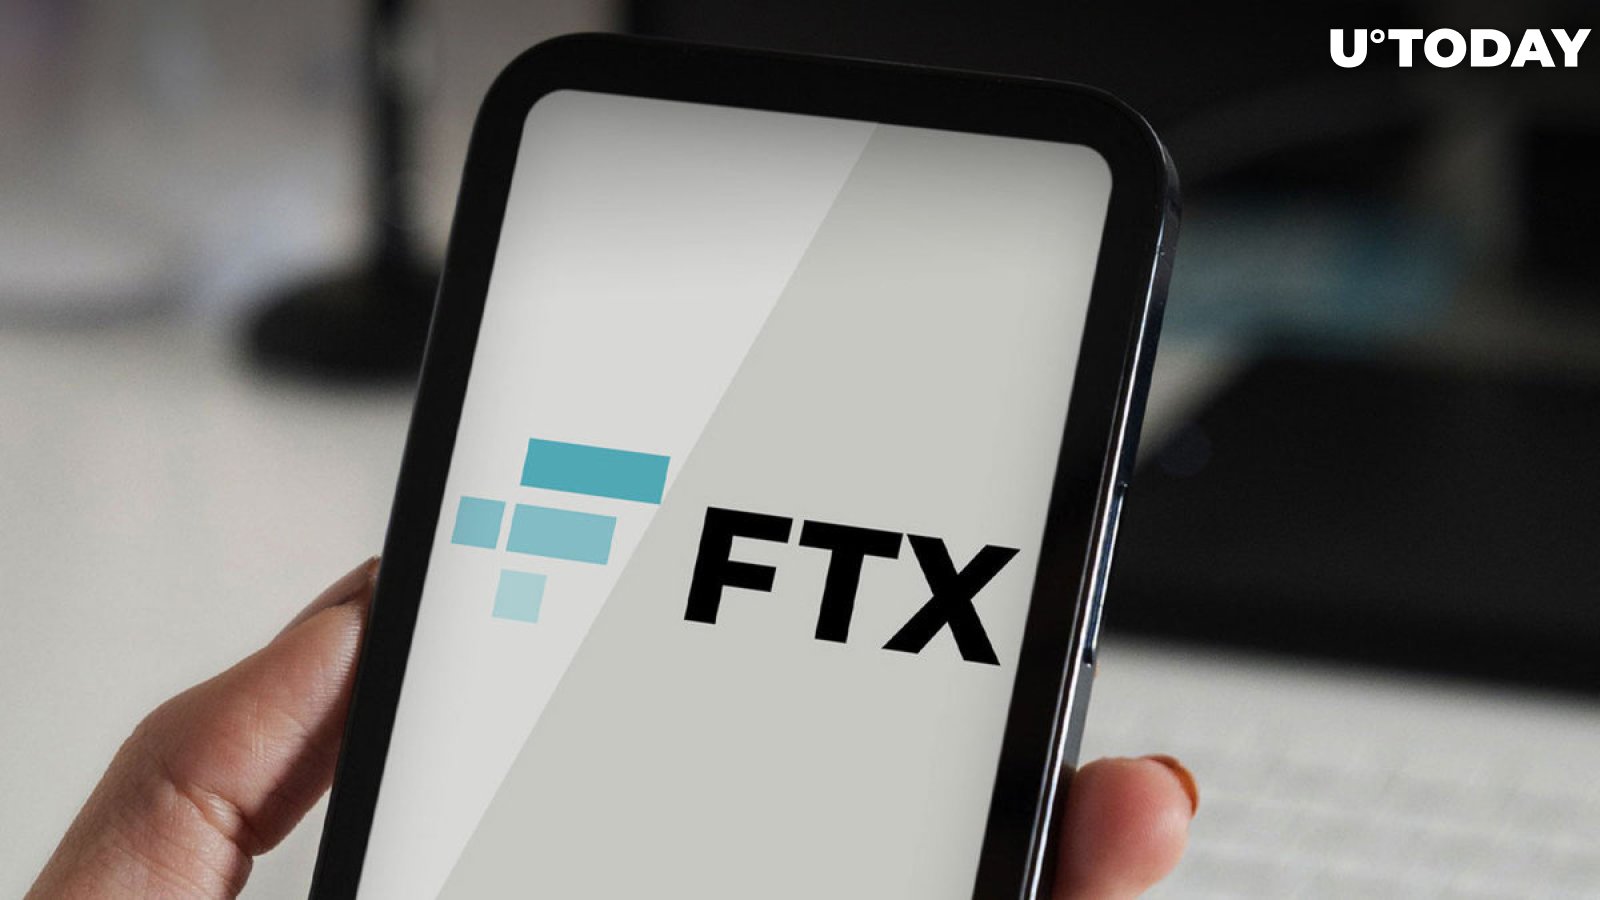 Crypto Influencer Who Warned About FTX Shares His View on What to Do Now